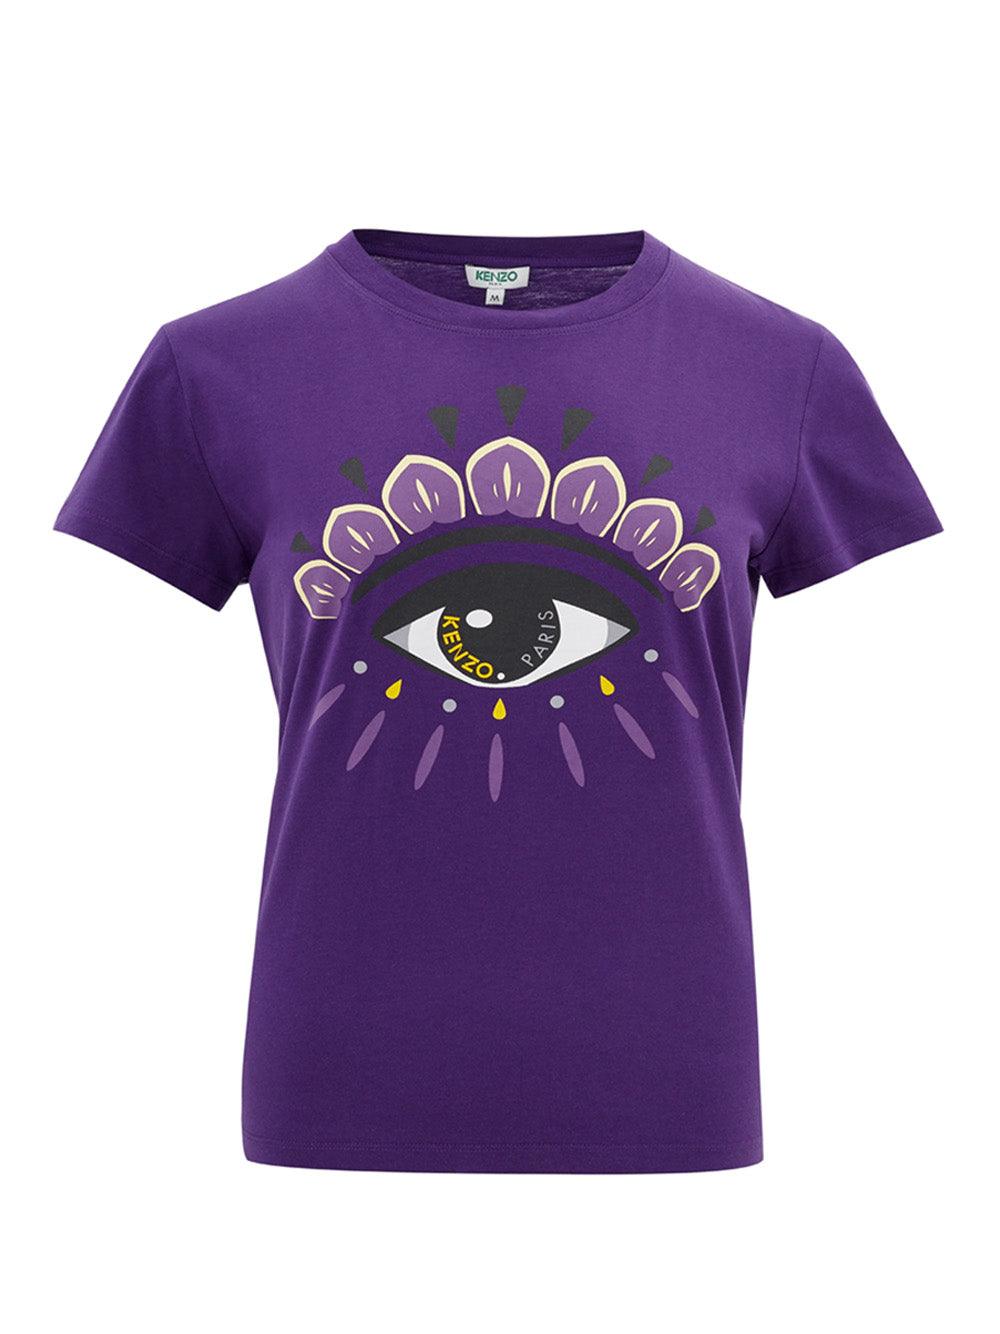 Kenzo Purple Cotton T-Shirt with Front 'Eye' Contrasting print - Ellie Belle